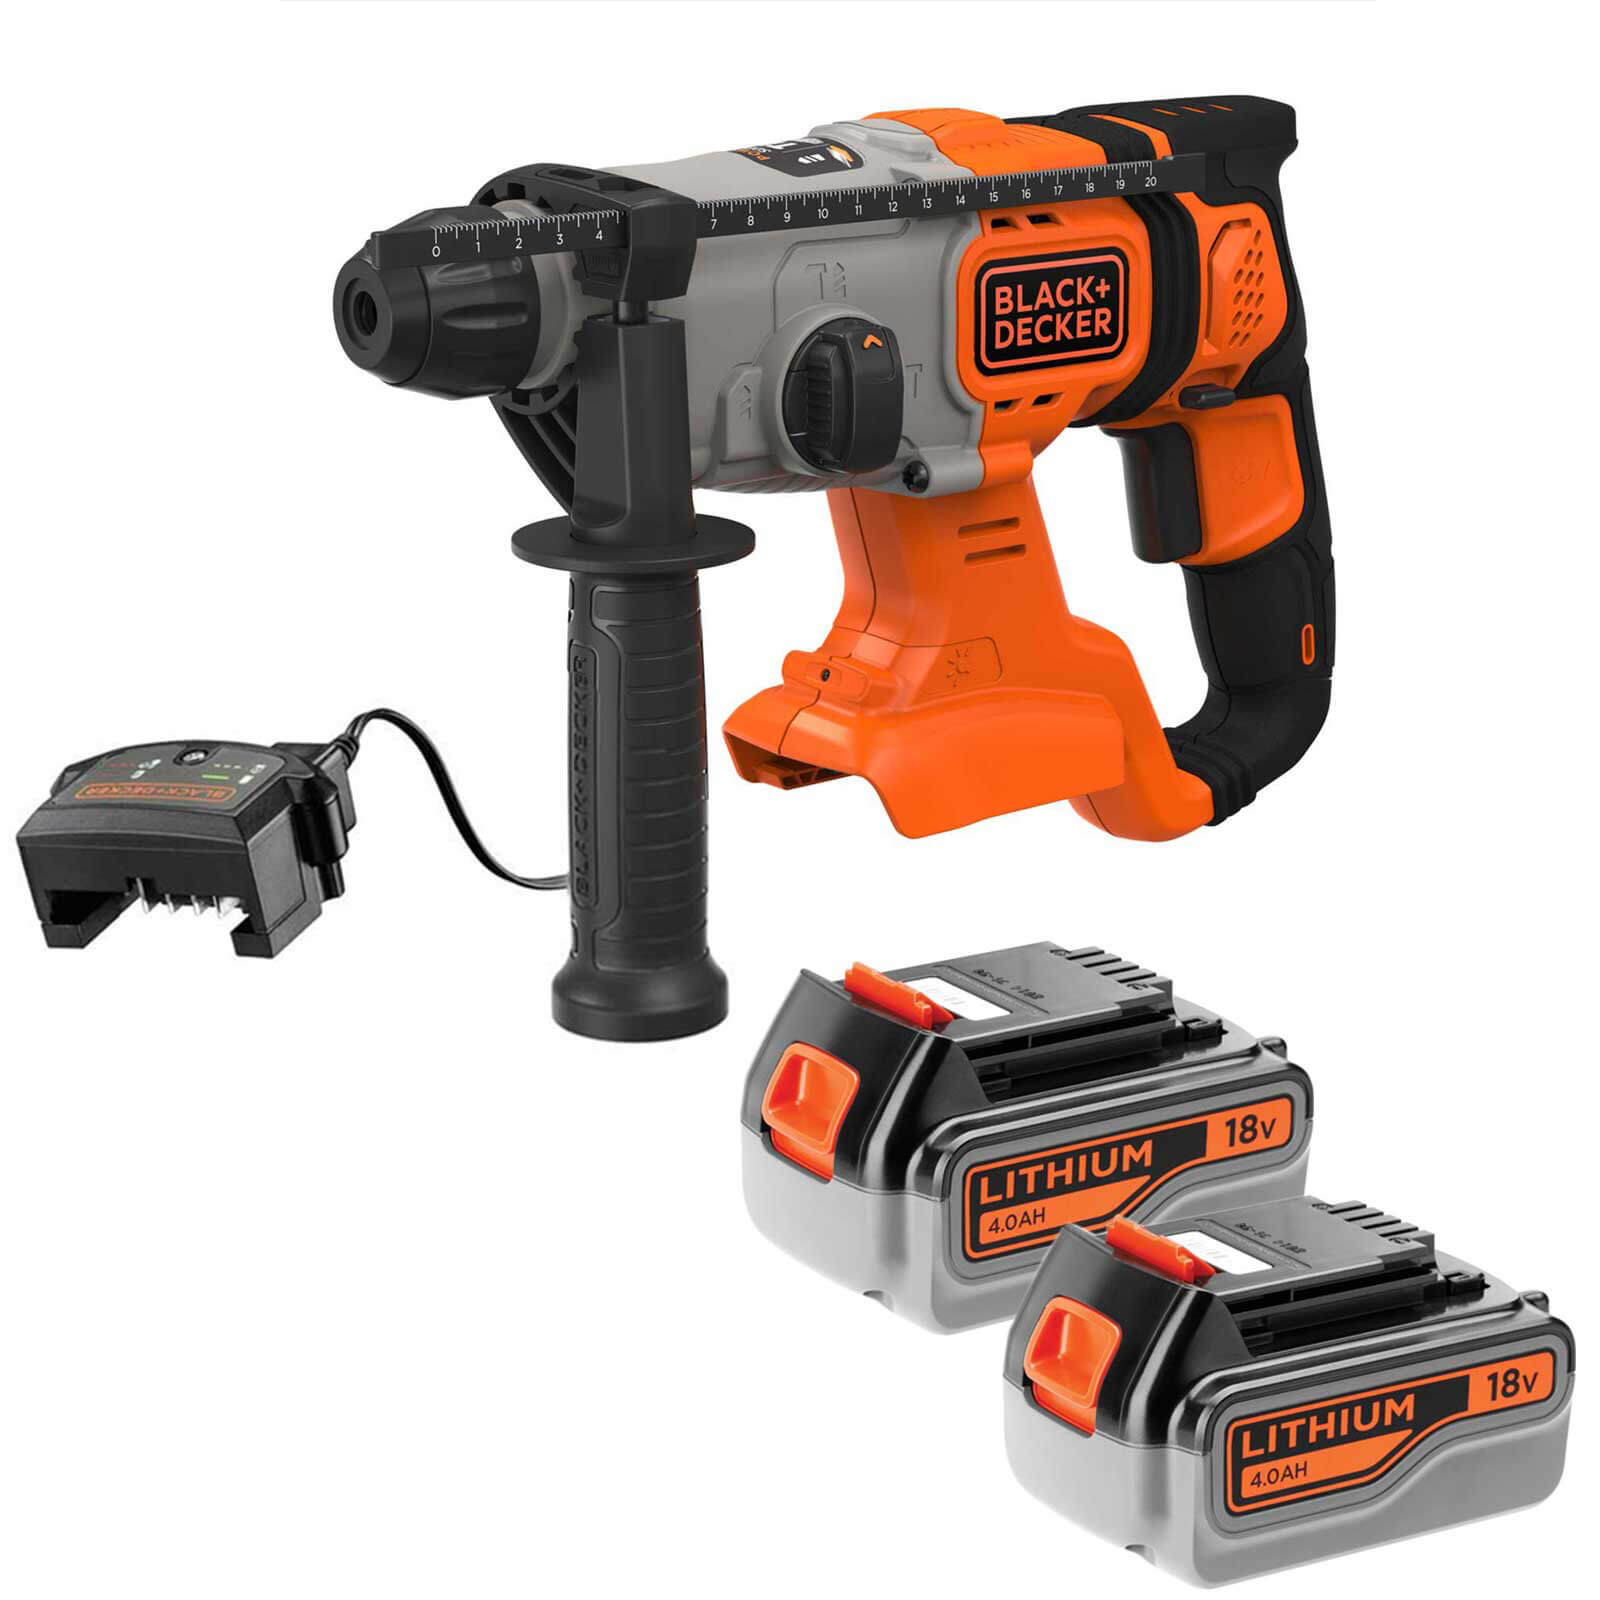 Image of Black and Decker BCD900 18v Cordless SDS Plus Hammer Drill 2 x 4ah Li-ion Charger No Case